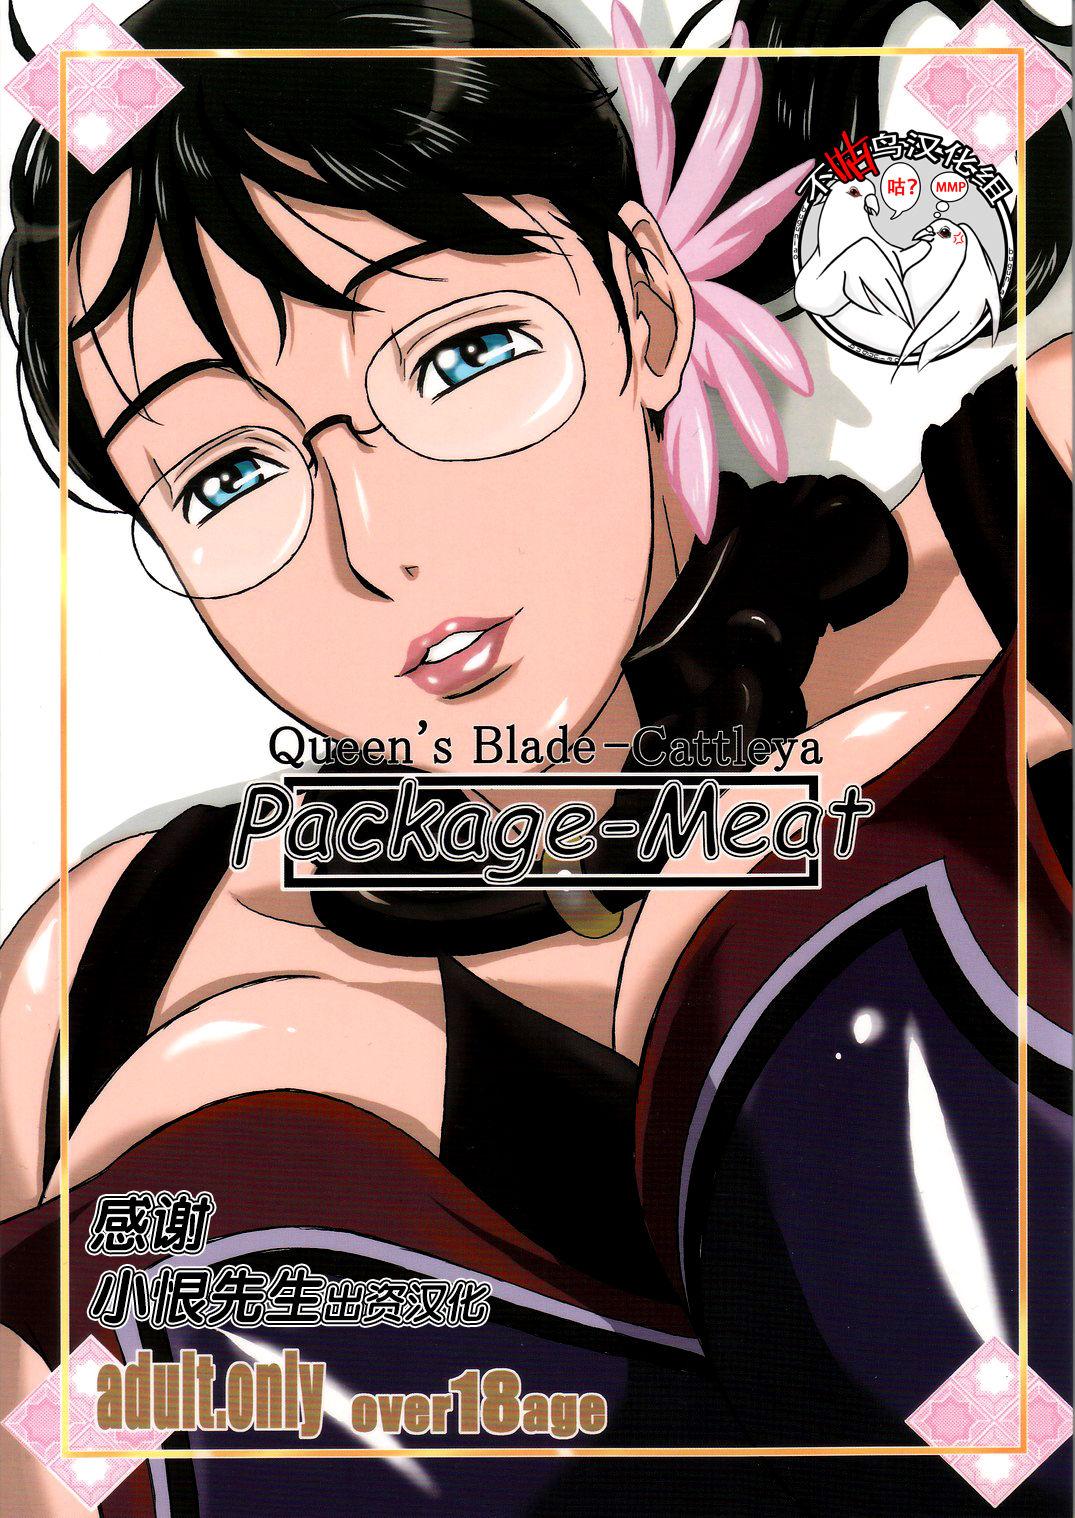 Petite Teenager (C72) [Shiawase Pullin Dou (Ninroku)] Package Meat (Queen's Blade) [Chinese] amateur coloring version - Queens blade Twink - Picture 1